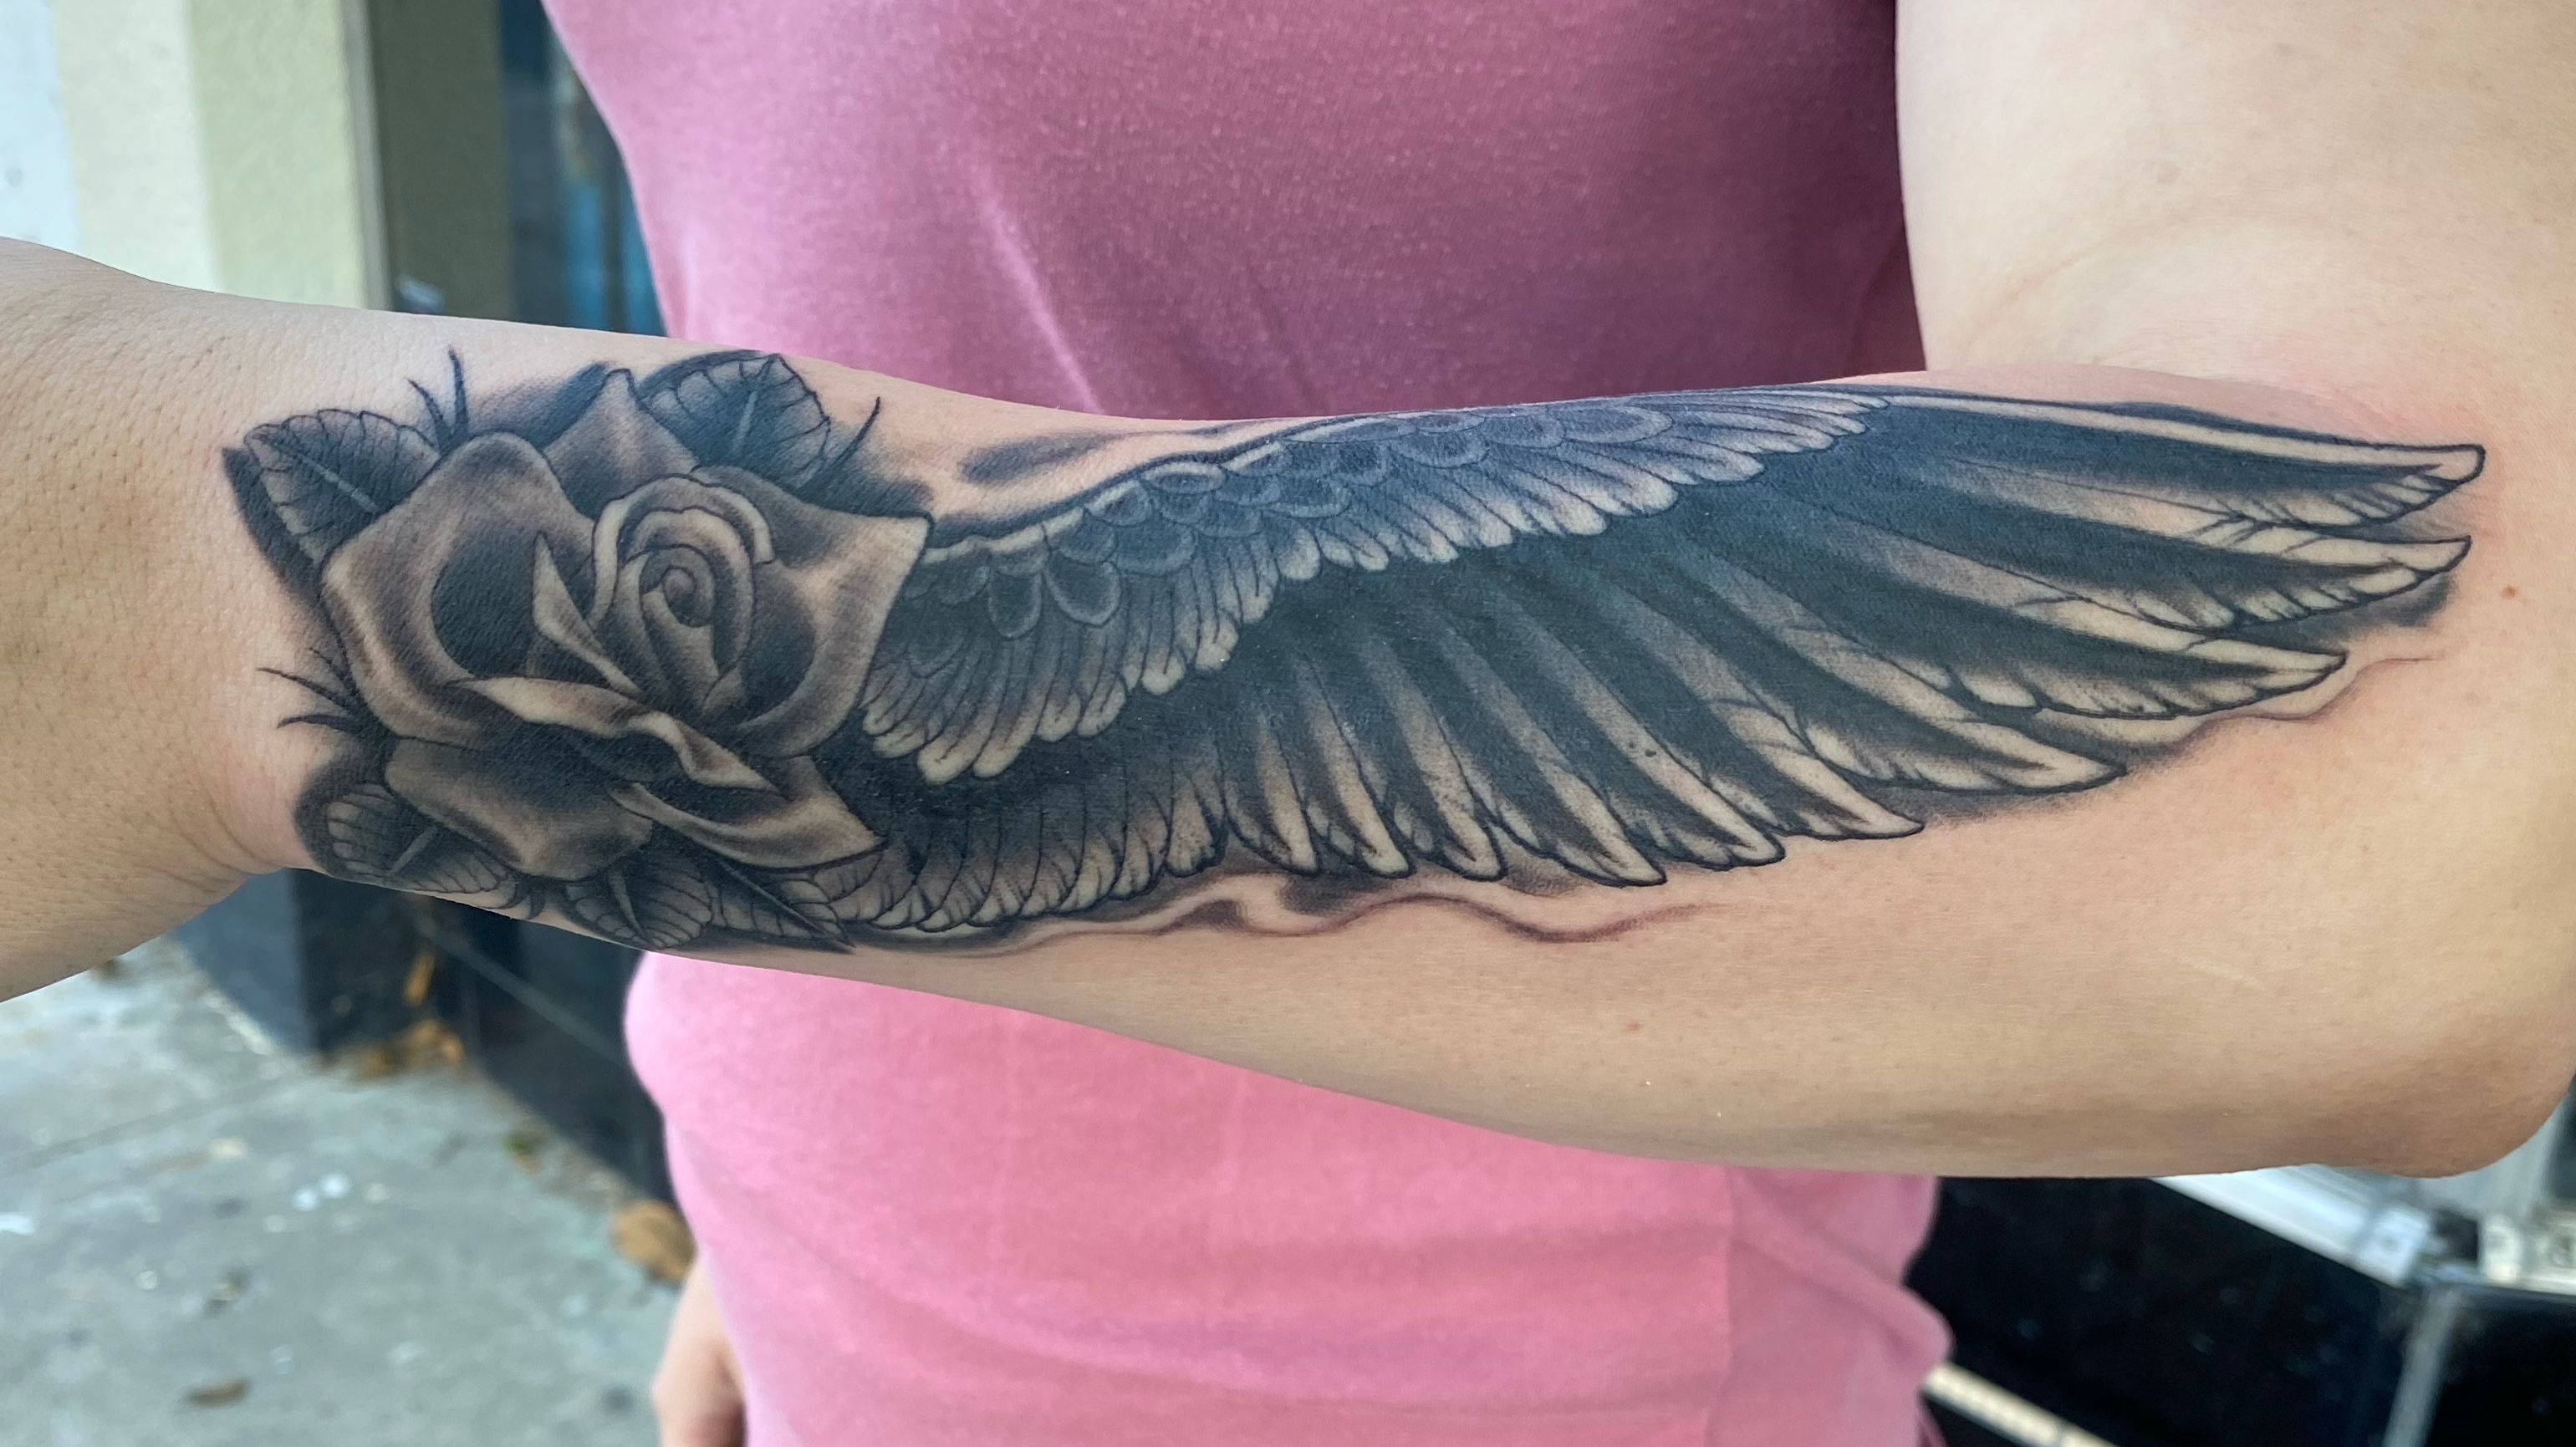 Grey Rose Flower And Eagle Tattoo On Arm Sleeve